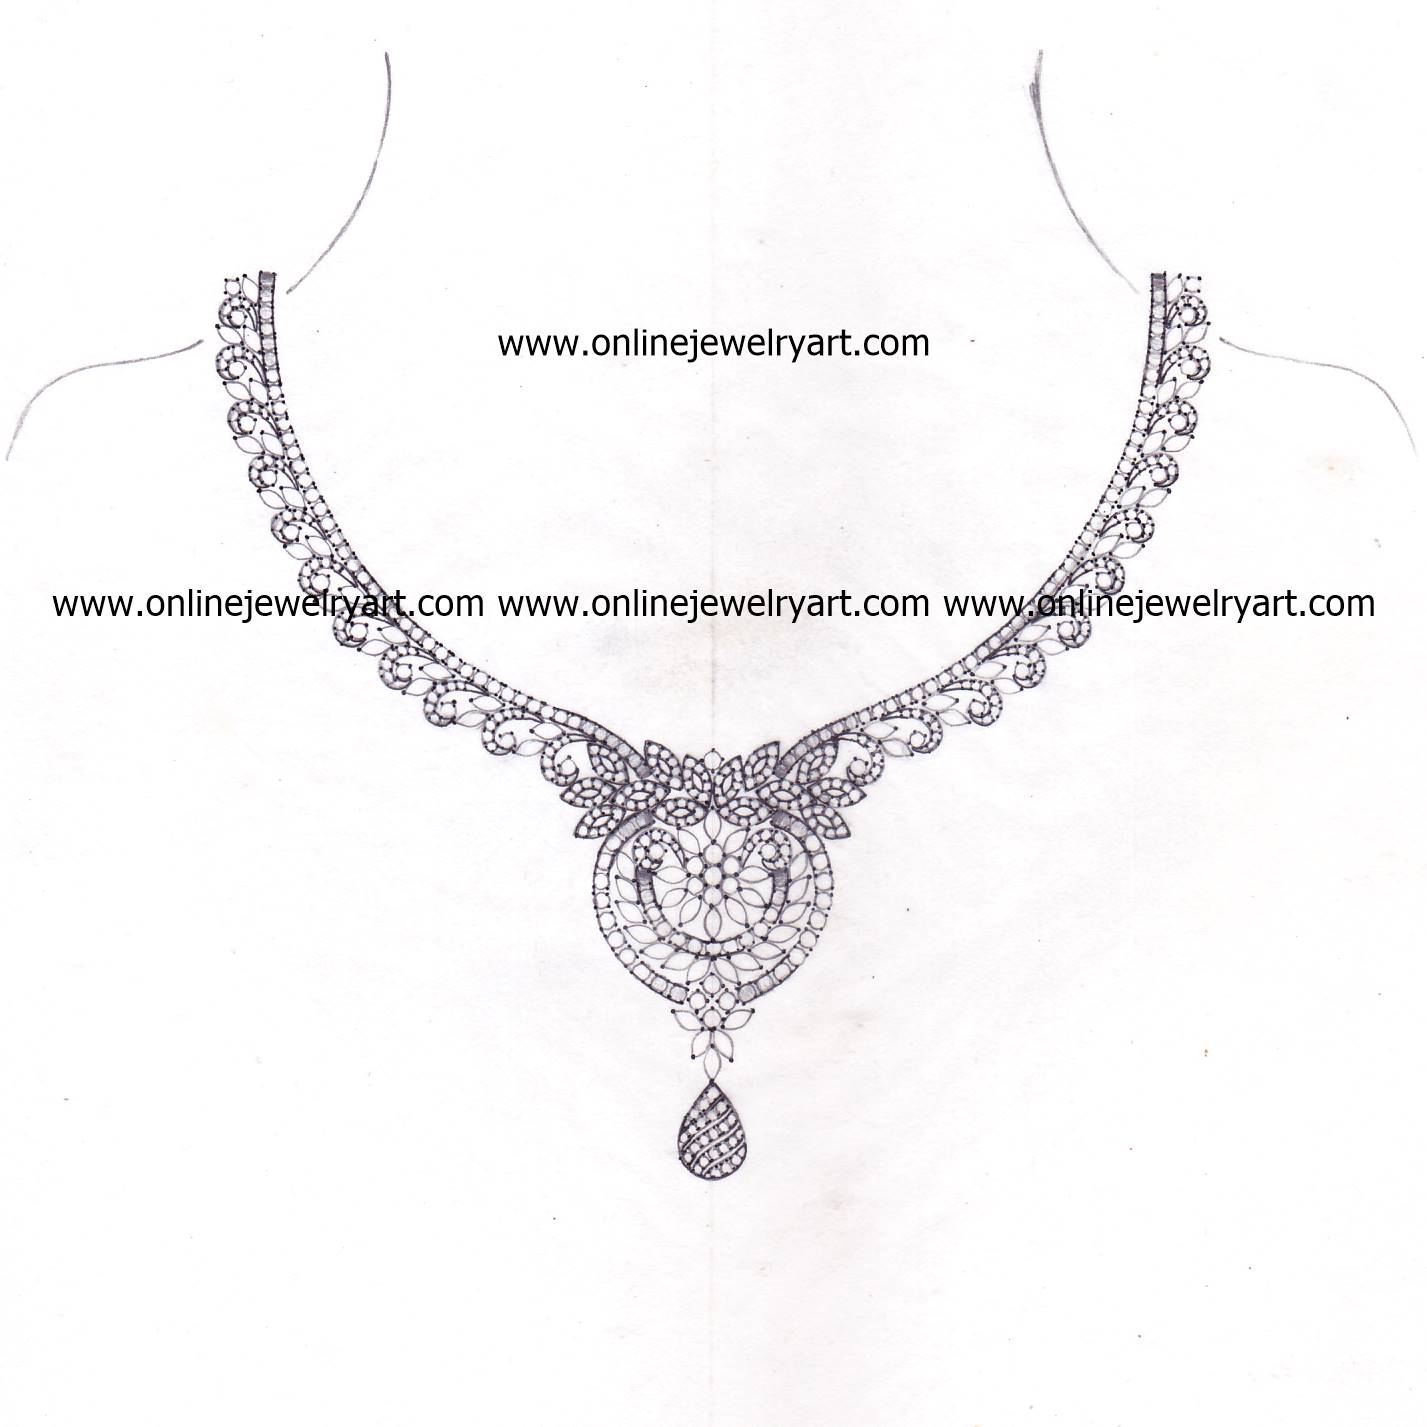 Jewellery Drawing Necklace Ring Precious Stones White Background Isolated  Sketch Stock Photo by ©AV_designer 407785648